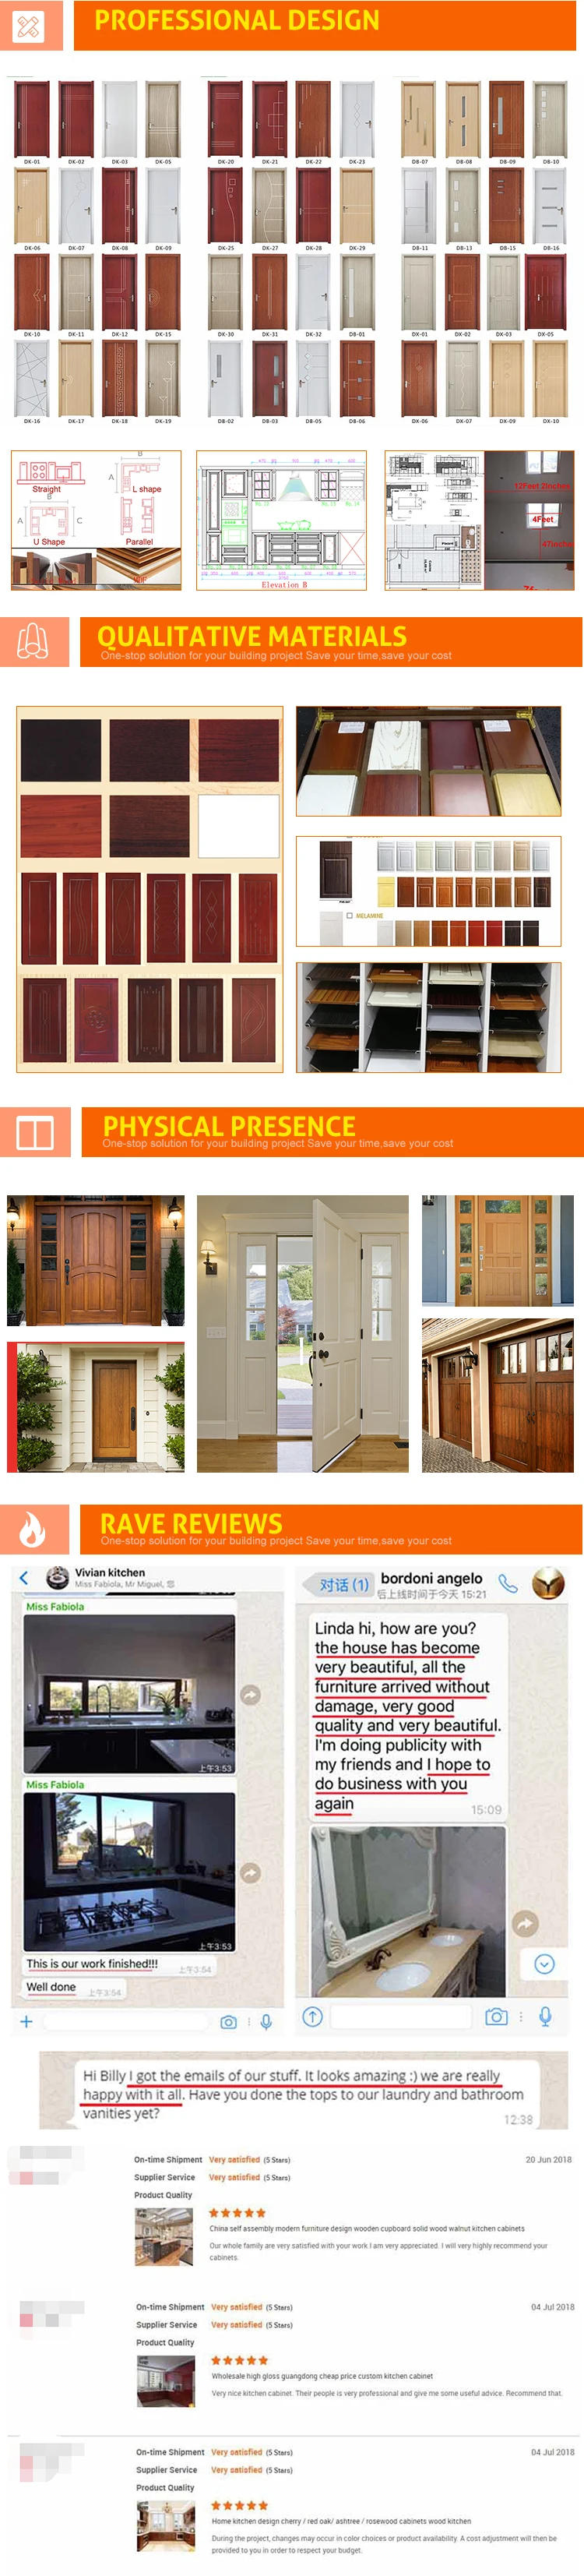 Cheapest PVC wooden door for house